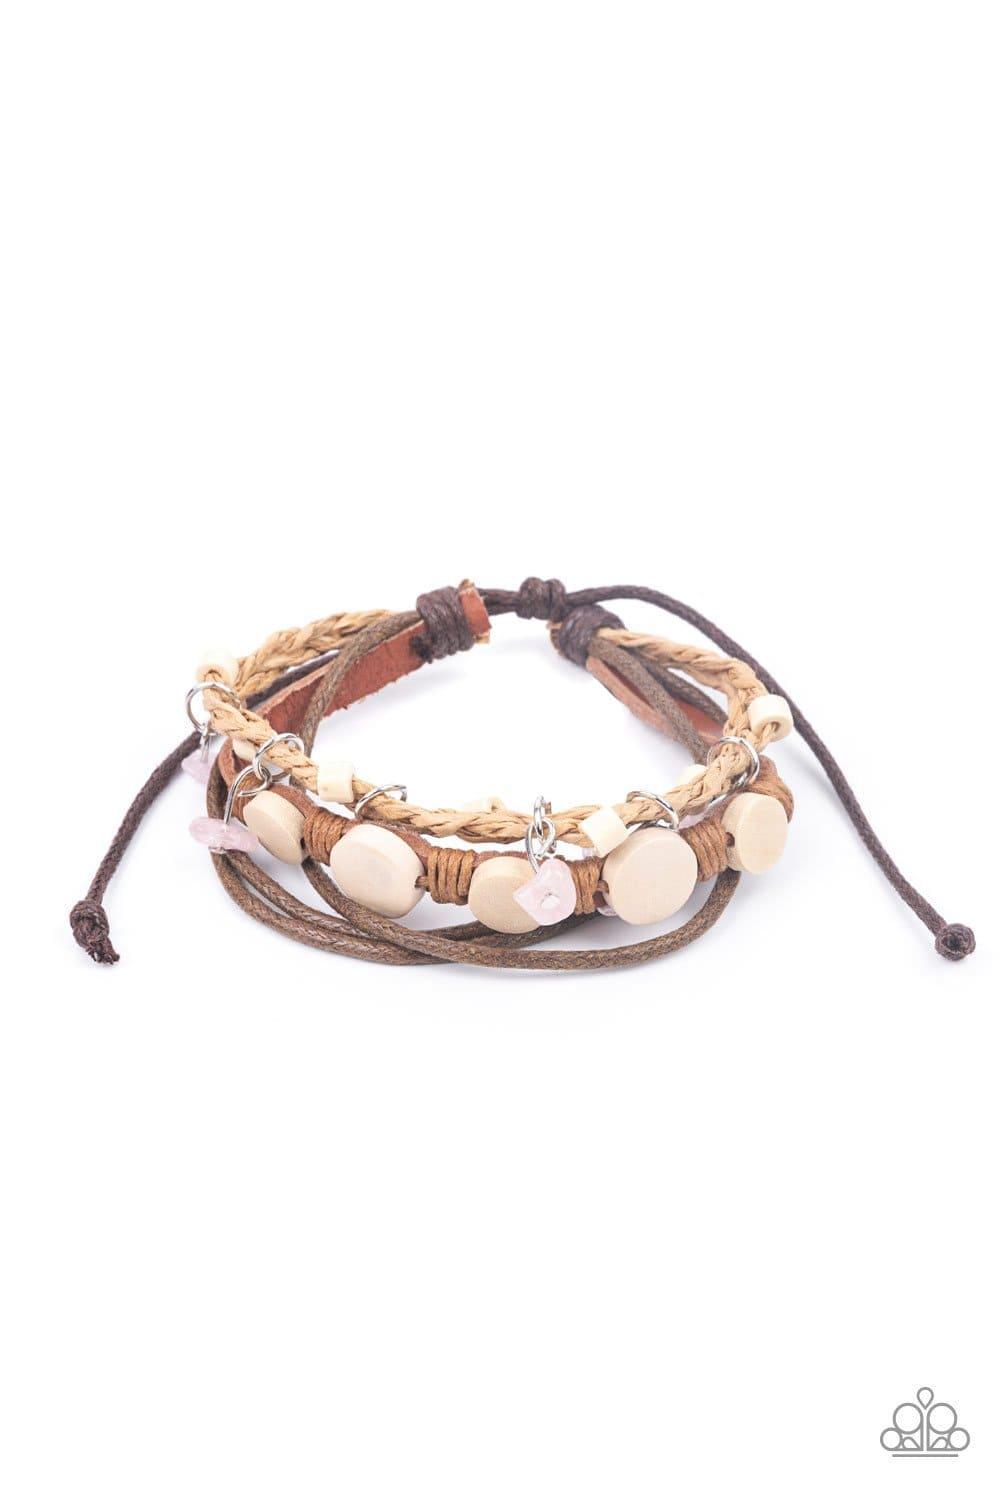 Paparazzi Accessories Run The Rapids - Pink Assorted strands of cording and leather, featuring flat wooden beads and small pink polished stones dangling from silver fittings, layer across the wrist for an earthy handcrafted style. Features an adjustable s